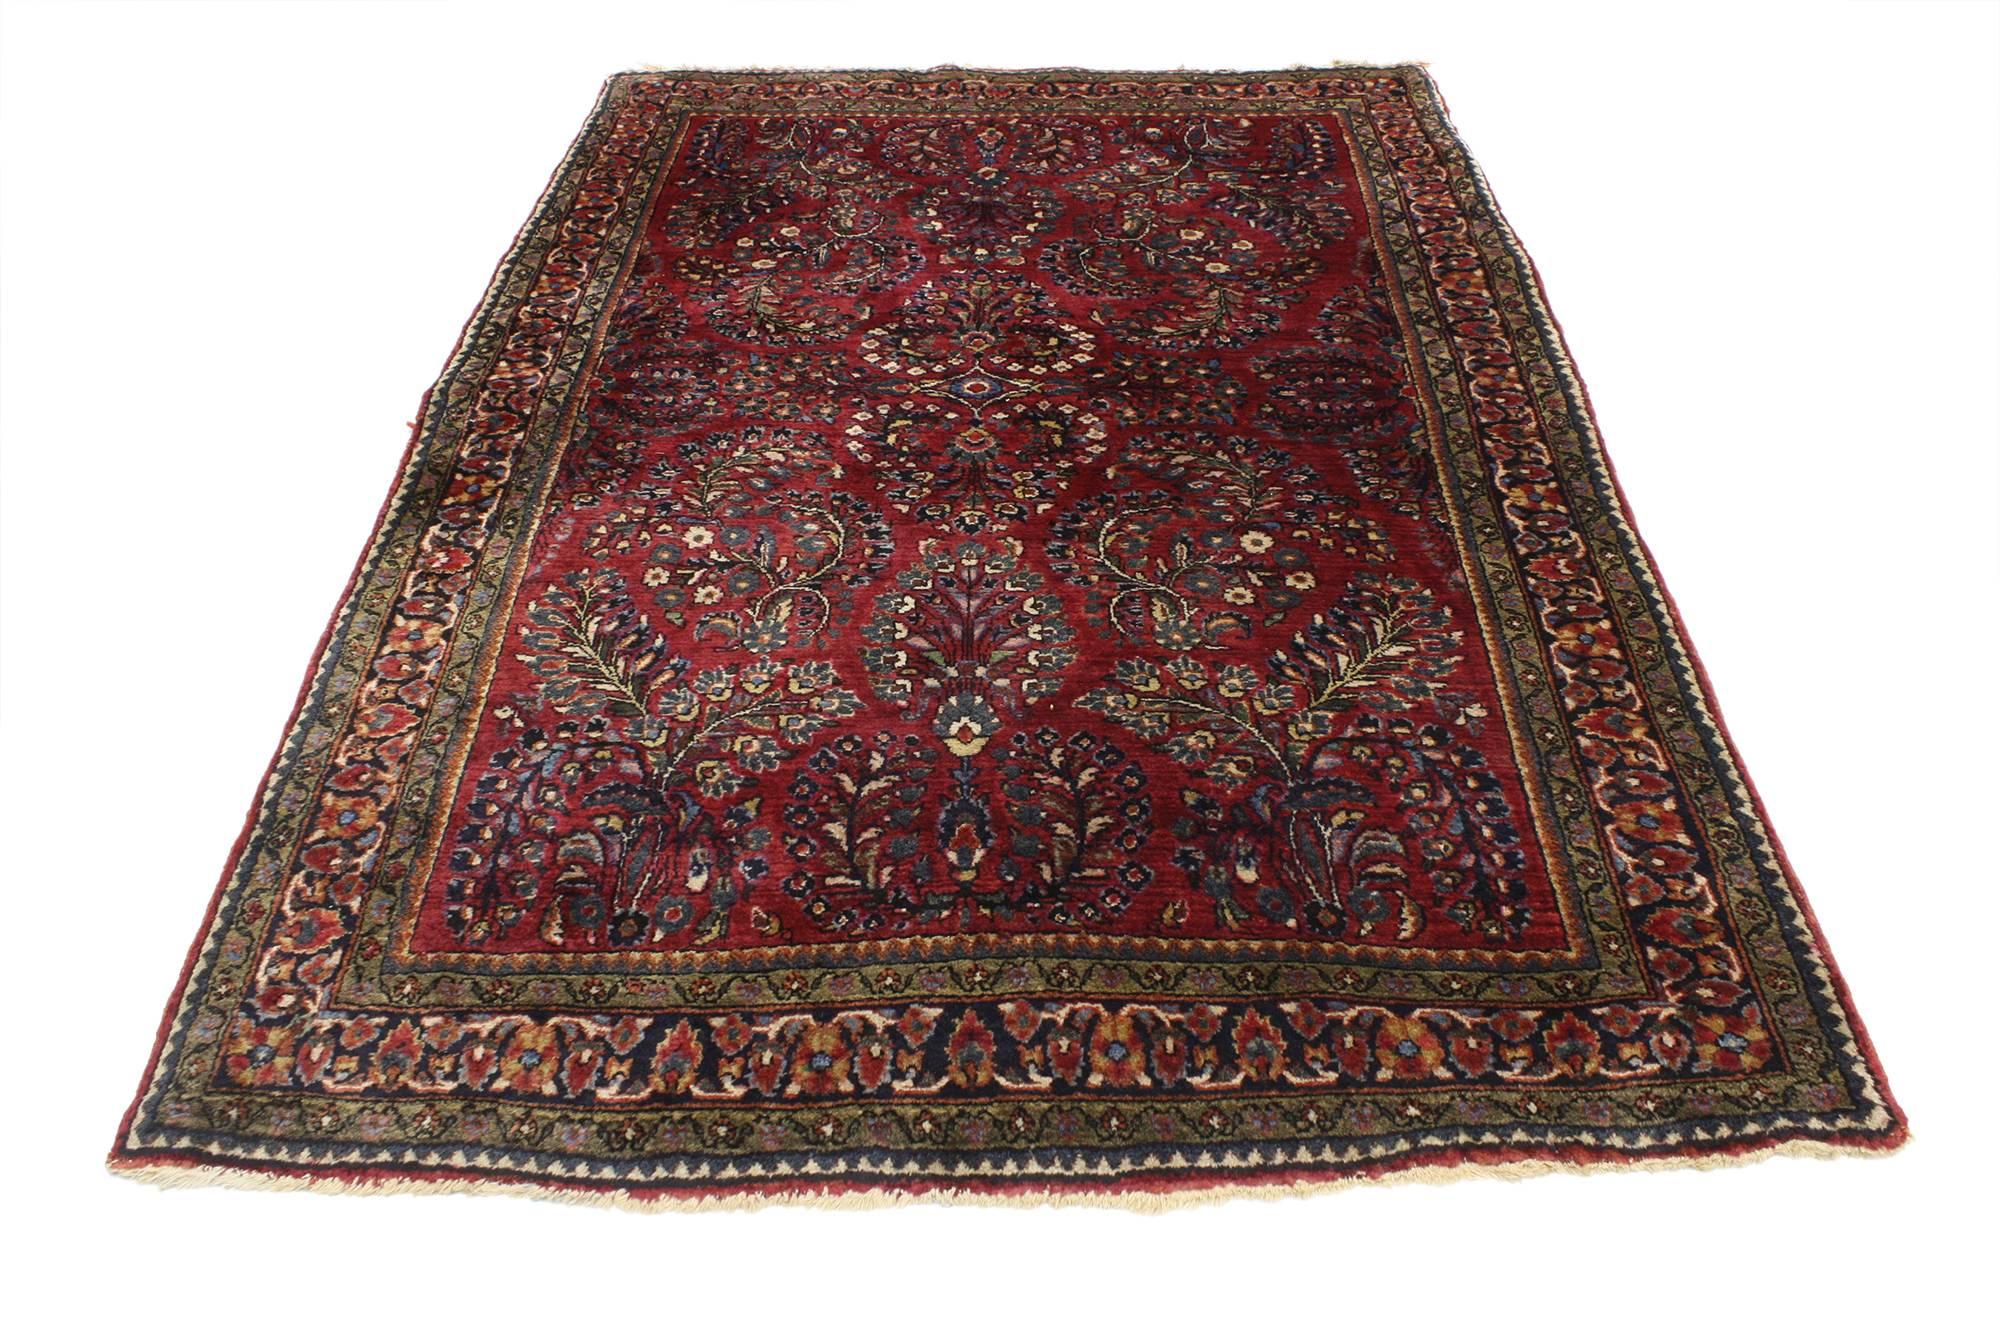 76947, antique Persian Sarouk rug with Art Nouveau style. Rich in color with beguiling beauty, this hand knotted wool antique Persian Sarouk rug is poised to impress. The abrashed dark ruby red field features an all-over botanical garden scene